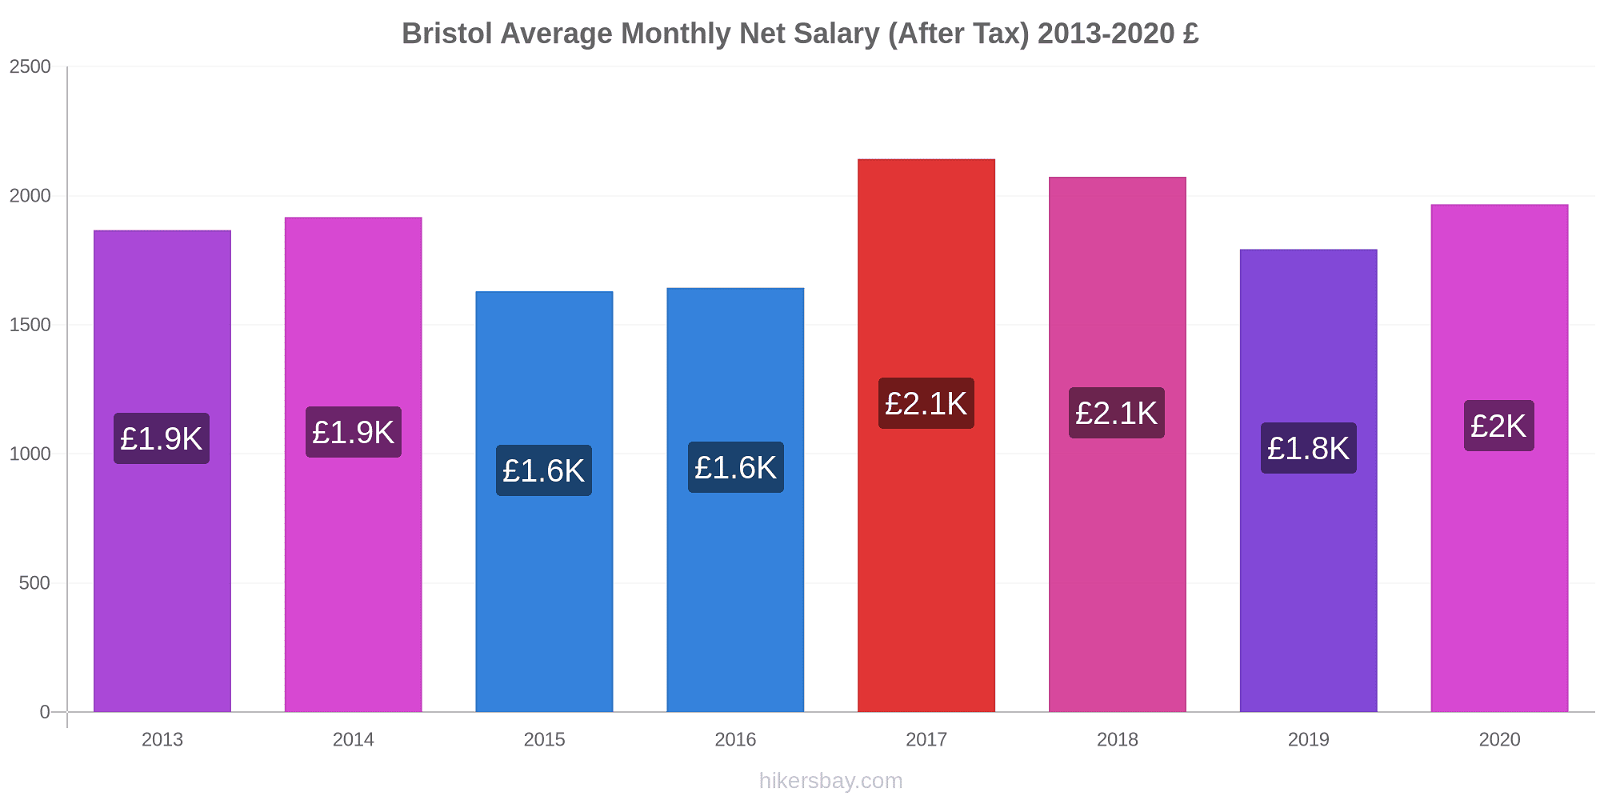 Bristol price changes Average Monthly Net Salary (After Tax) hikersbay.com